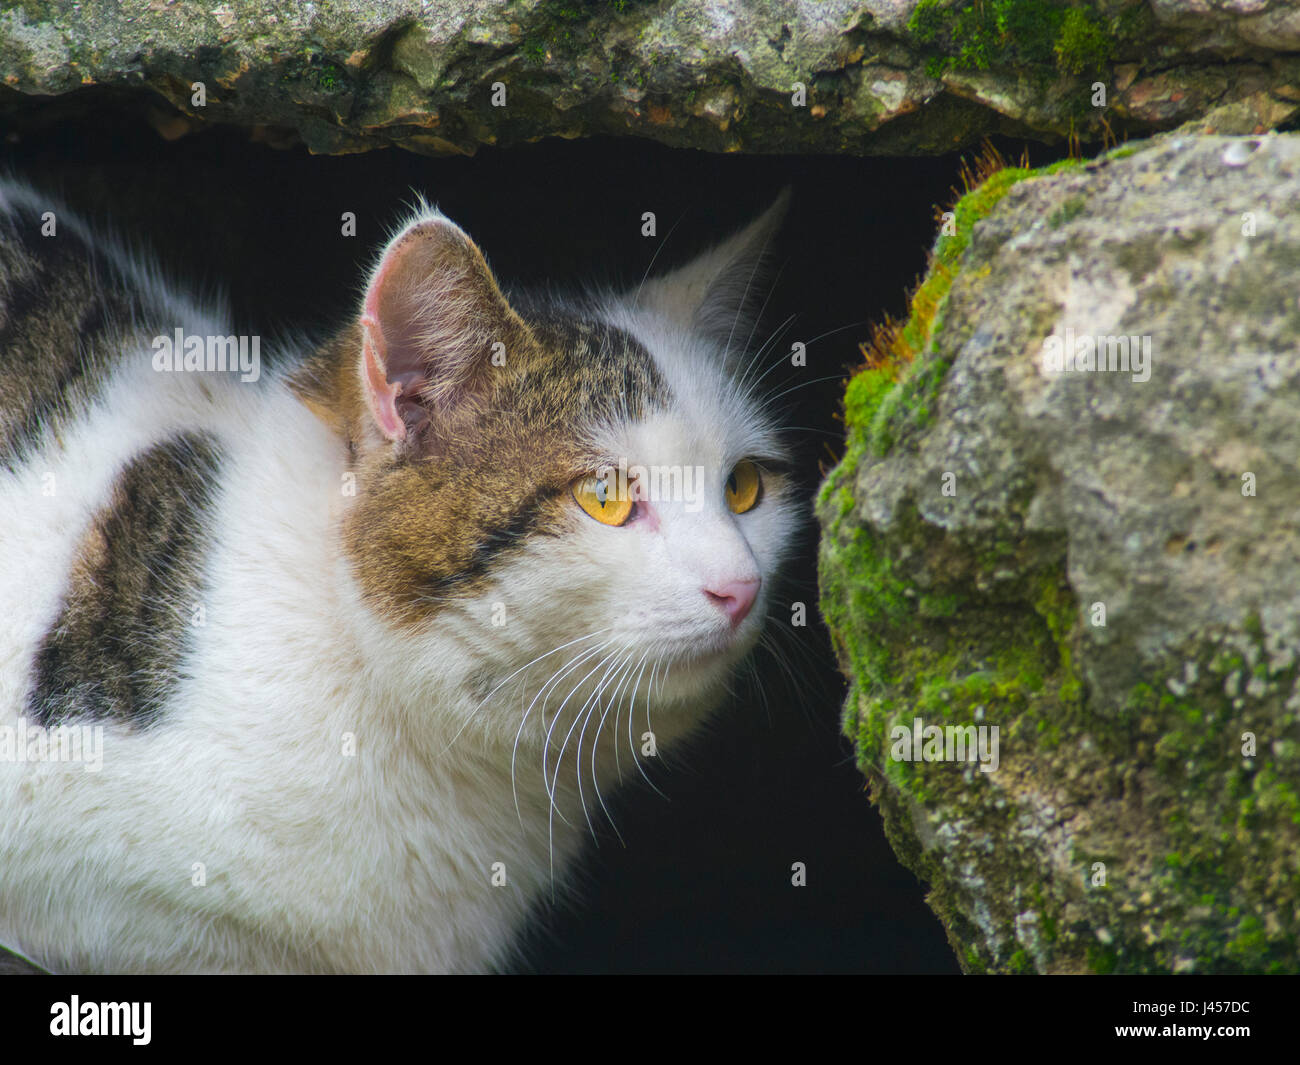 A cunning cat hides among the stones close up Stock Photo